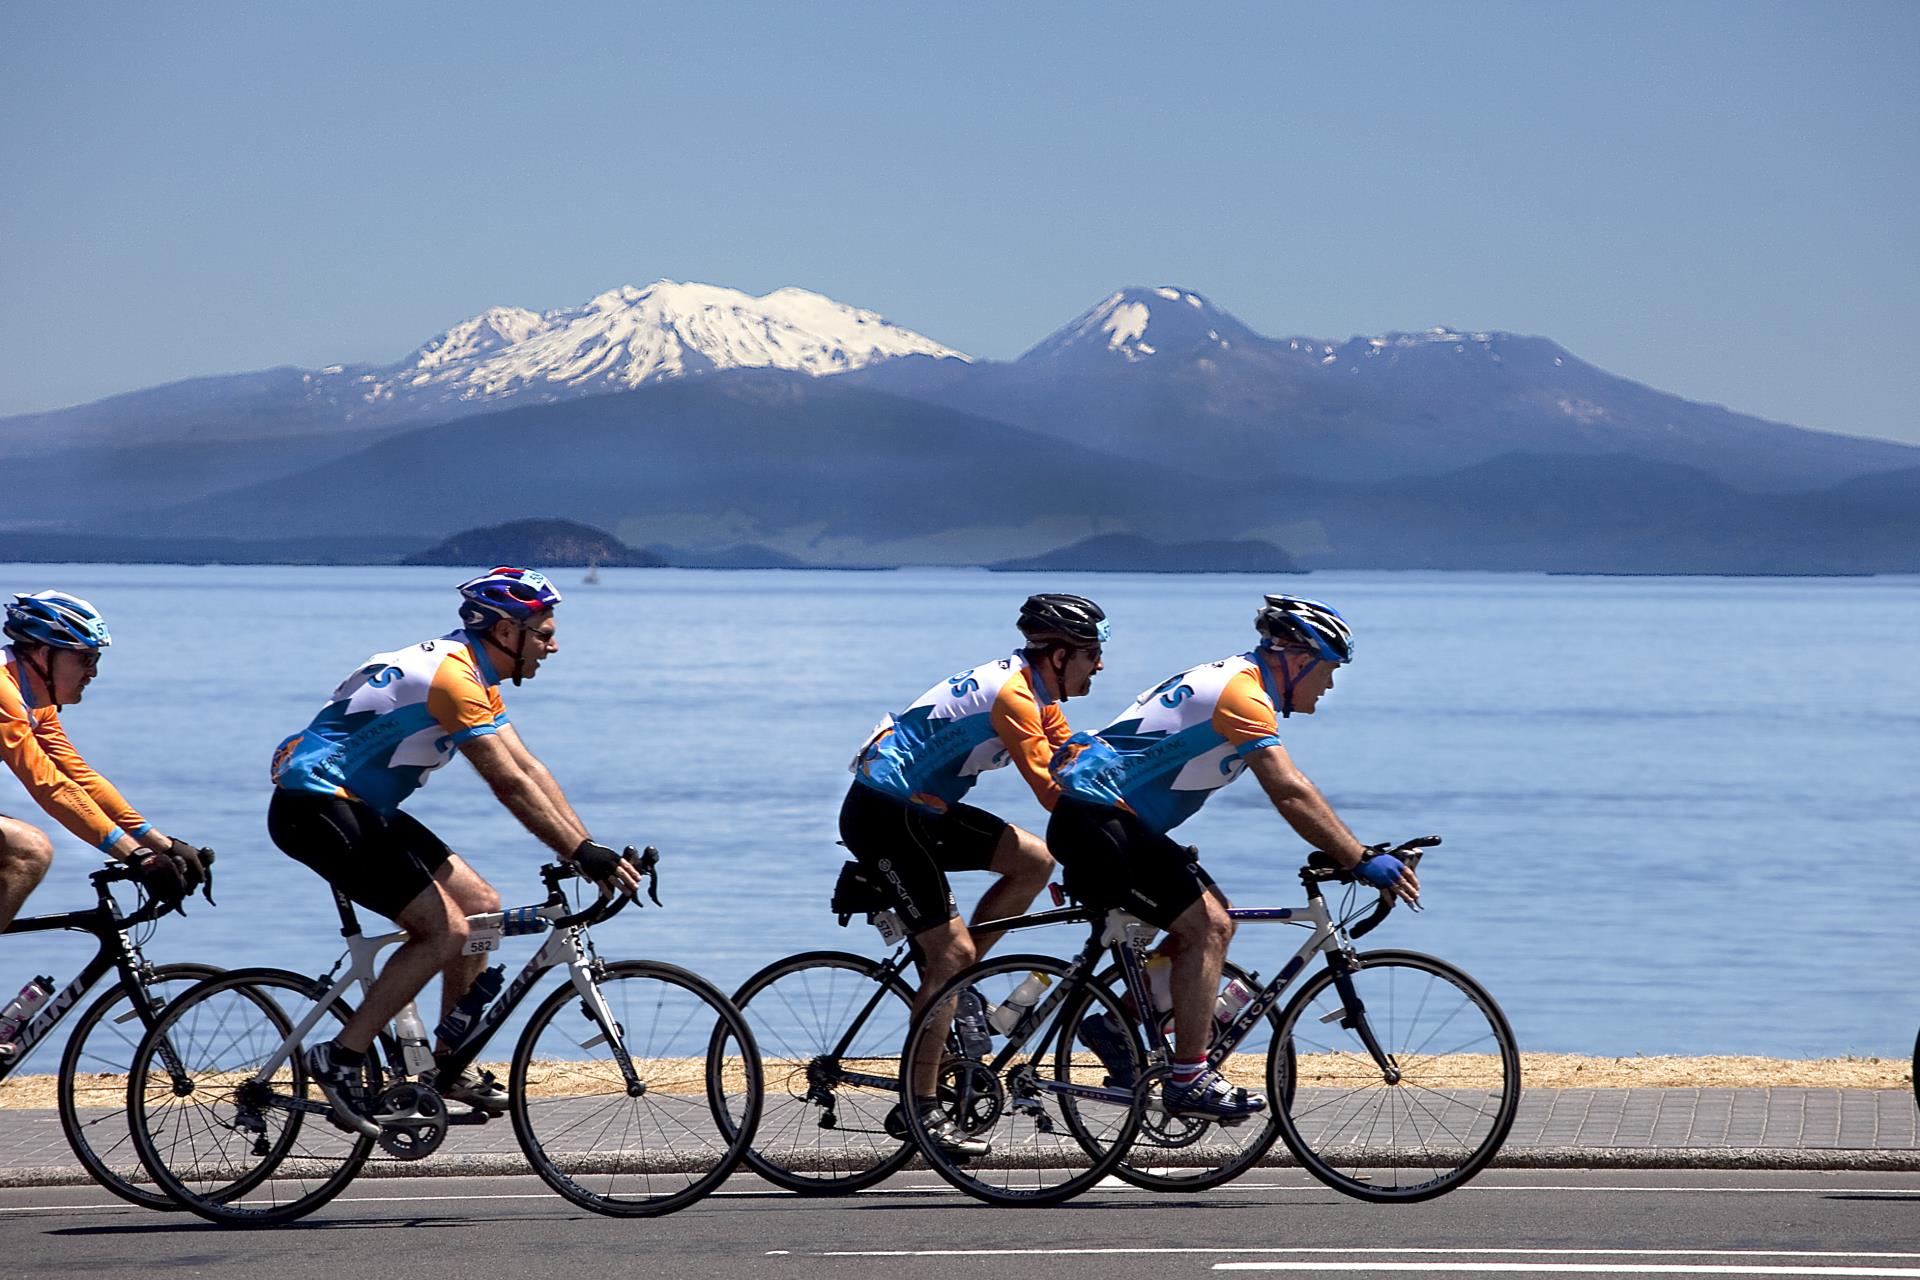 Lake Taupo New Zealand Activities and Attractions